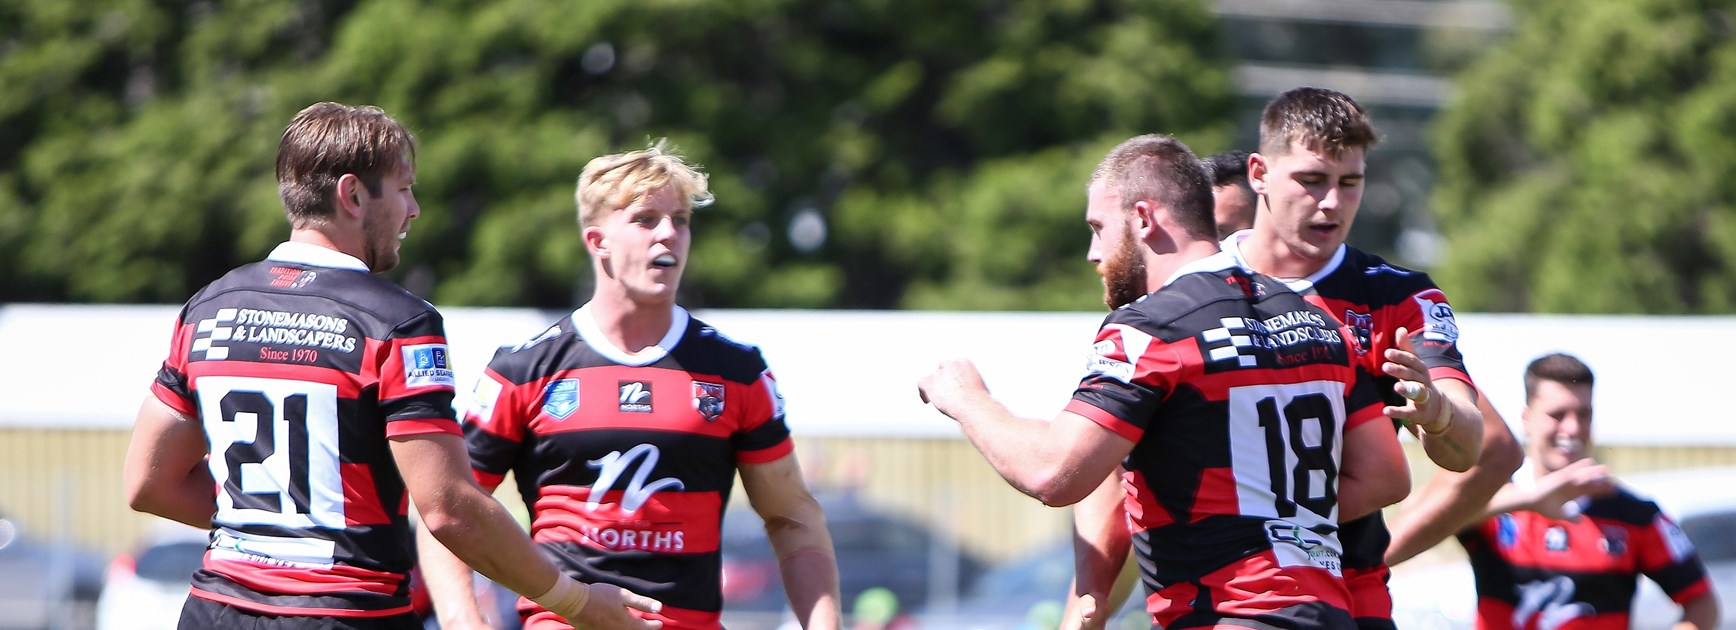 Pathways Squads Named to Take On Sea Eagles